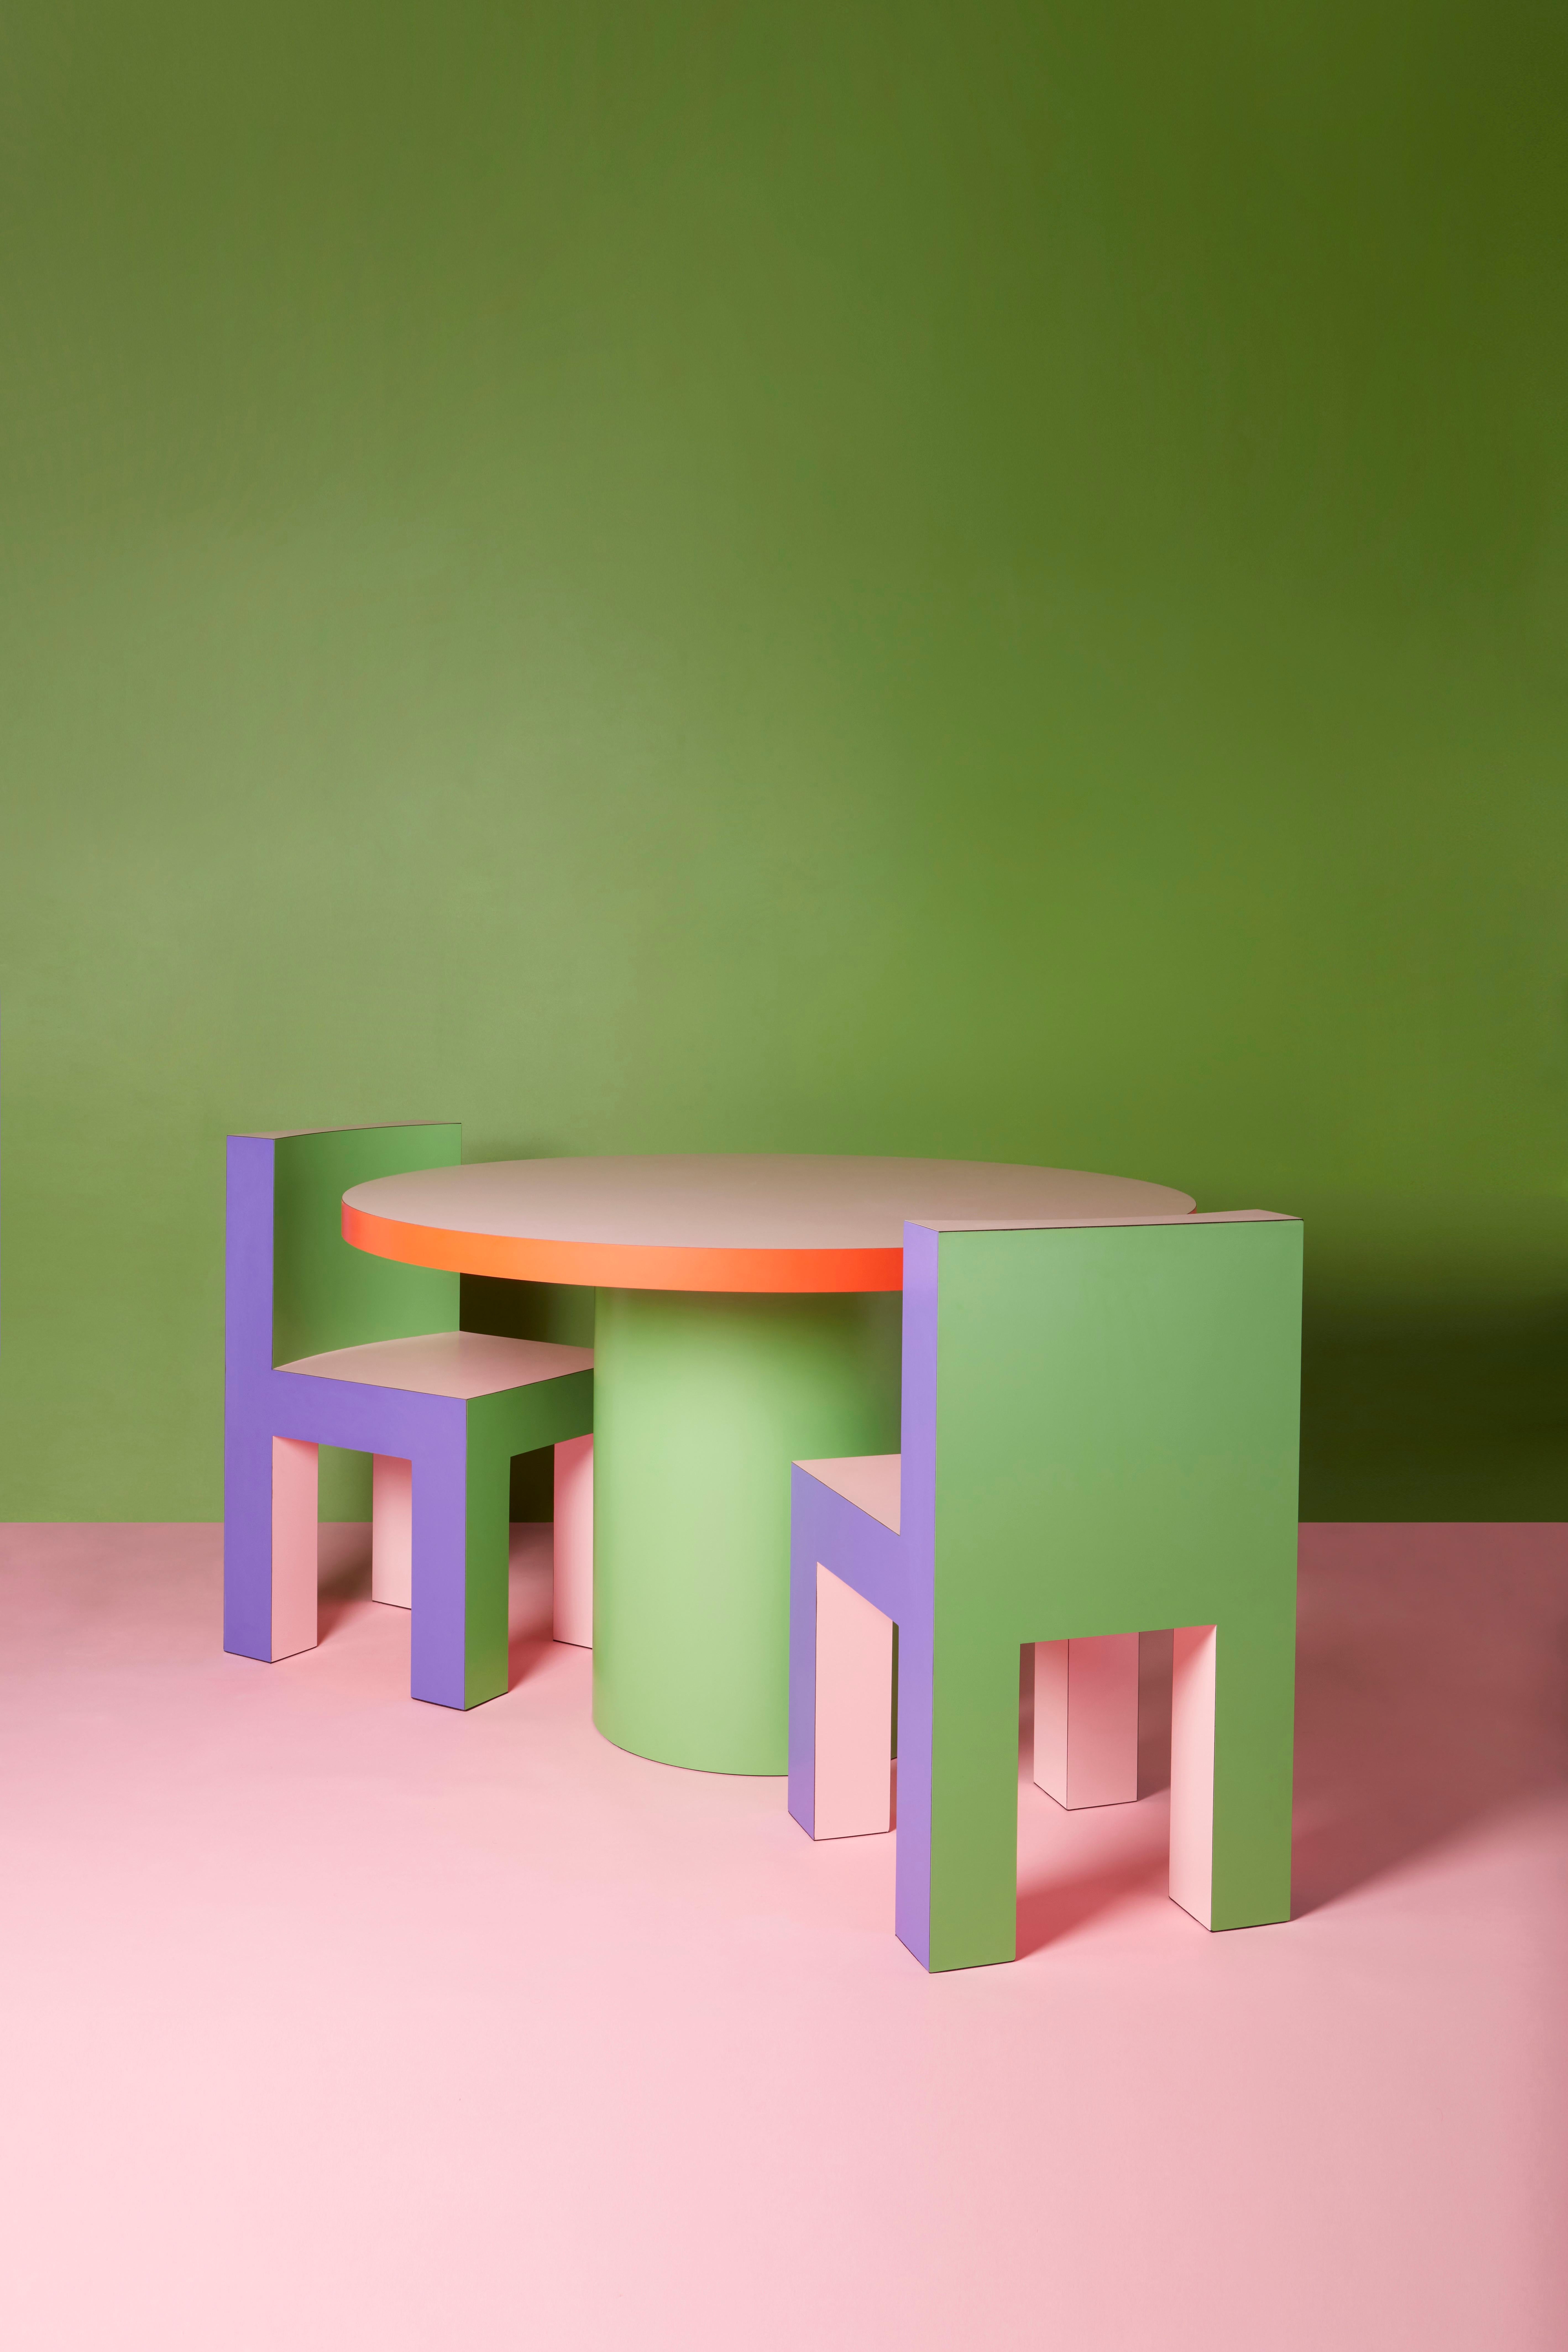 Laminate Tagada´ Chair by Stamuli, Green, Violet, Pink For Sale